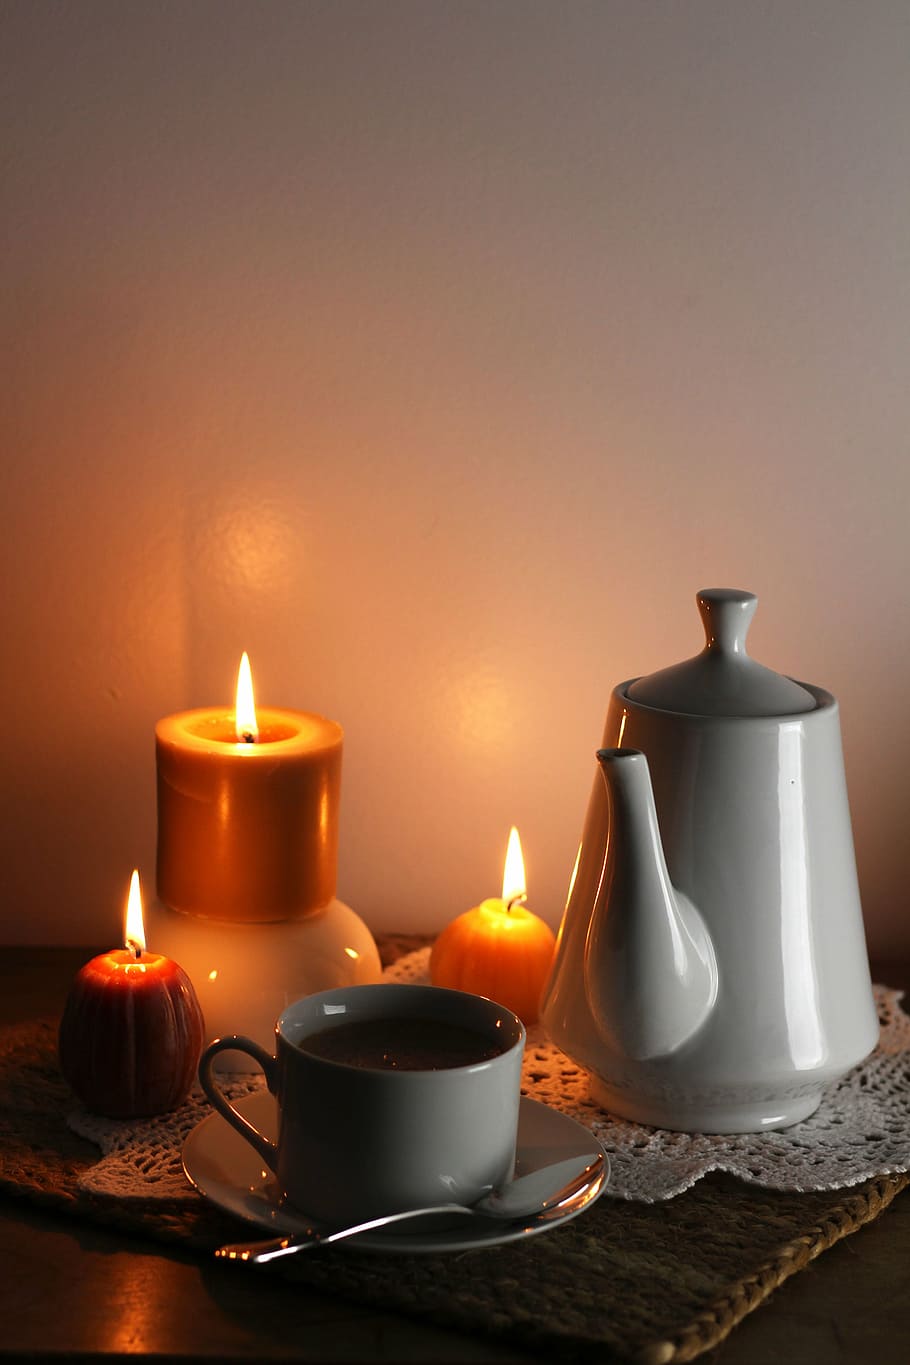 three orange candles beside teacup and teapot on brown mat, coffee, HD wallpaper